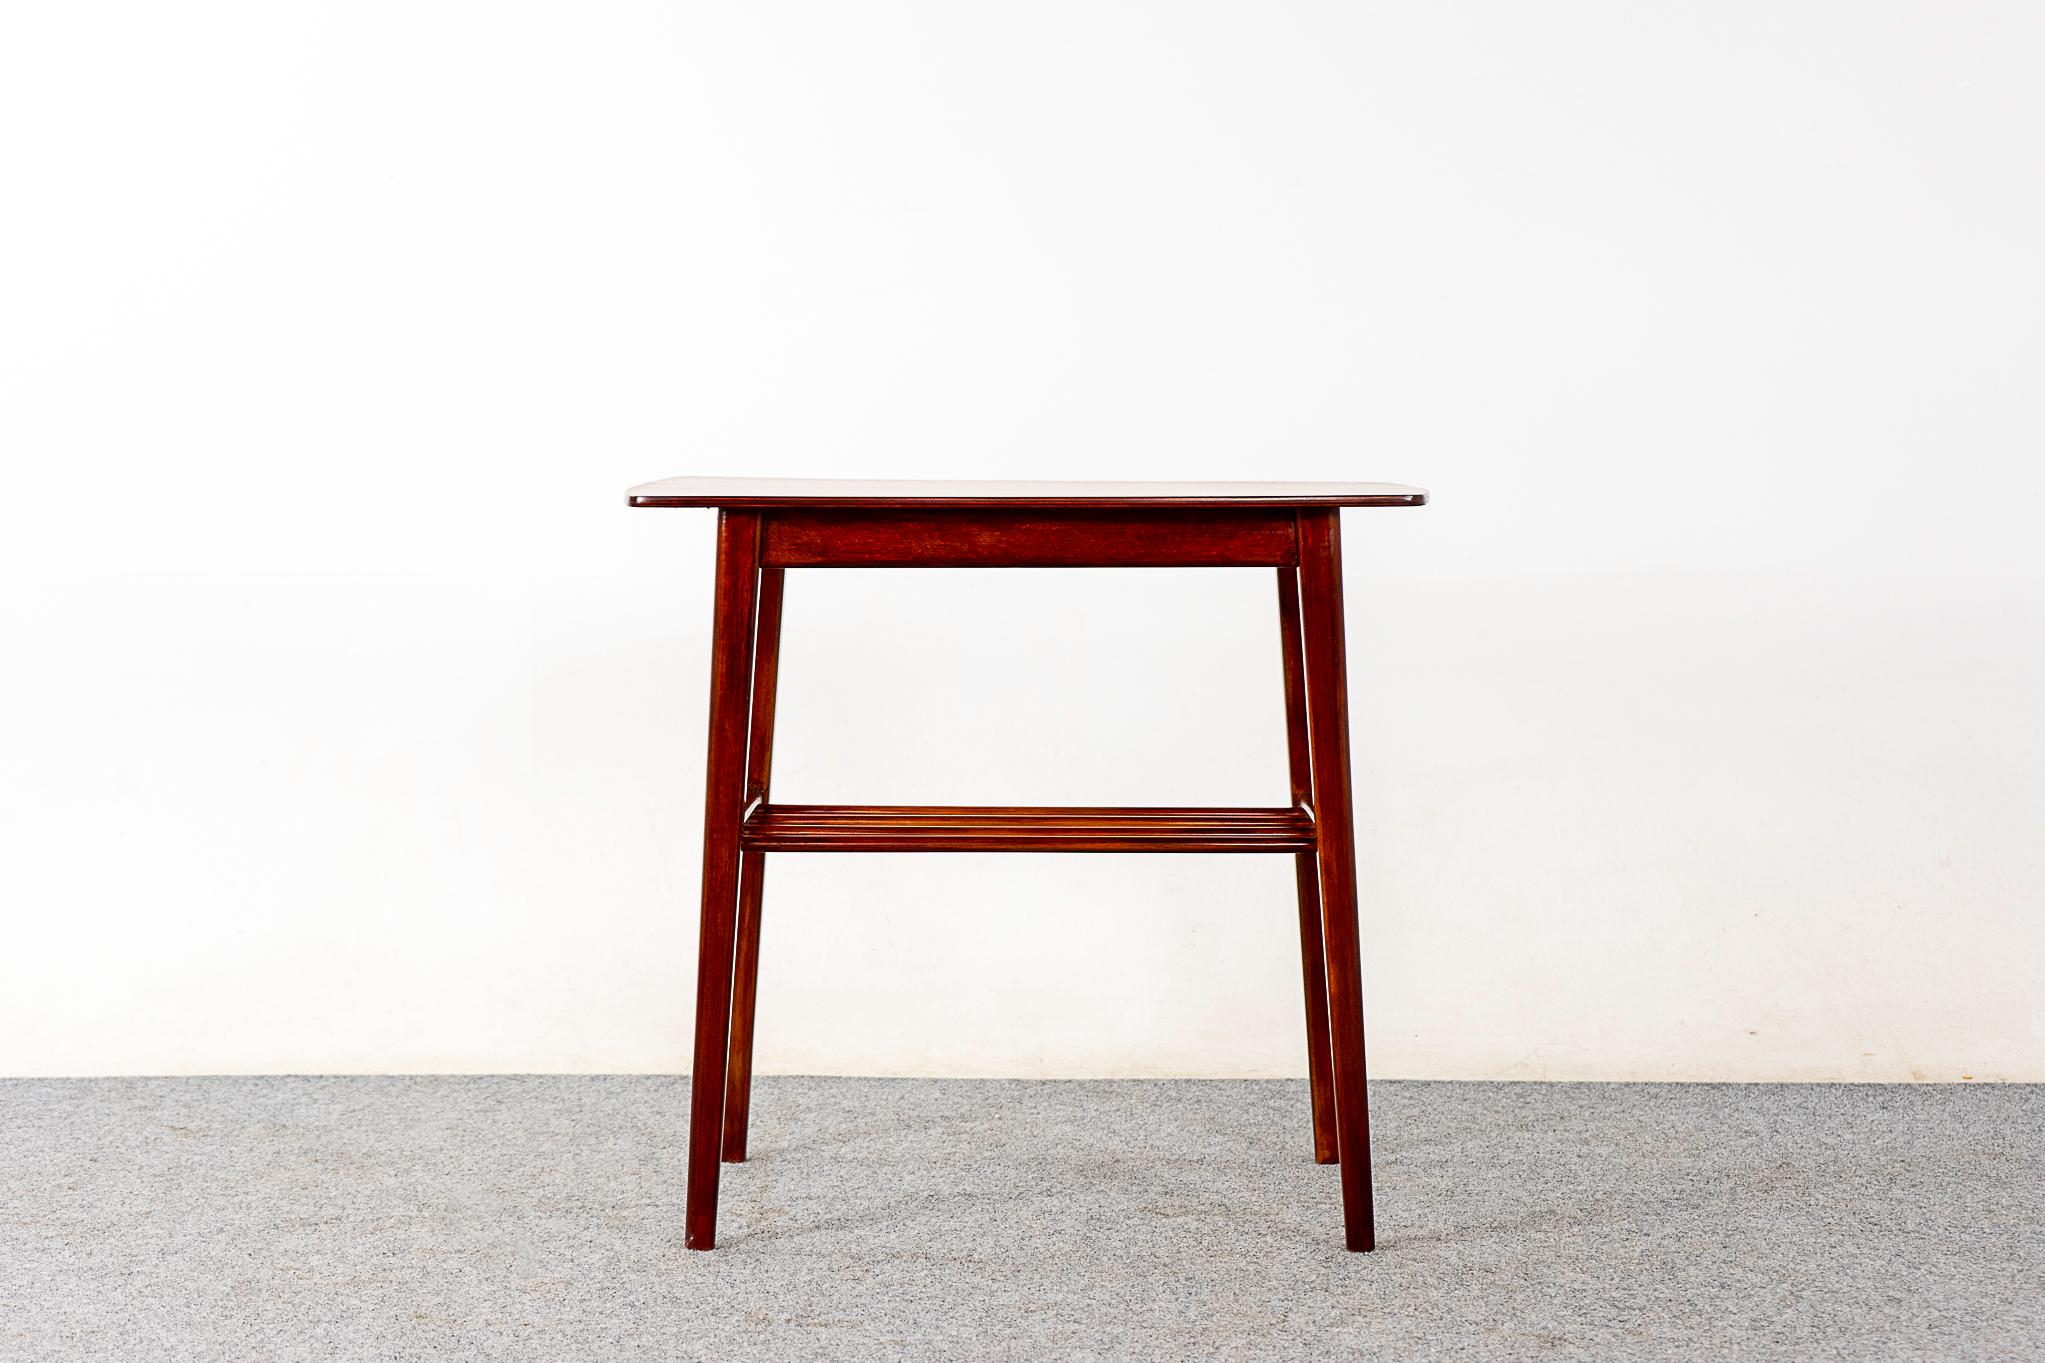 Teak & beech side table, circa 1960's. Solid beech wood construction on base, and handsome book-matched teak veneer top! Handy shelf for the space conscious homeowner!

Please inquire for remote and international shipping rates.